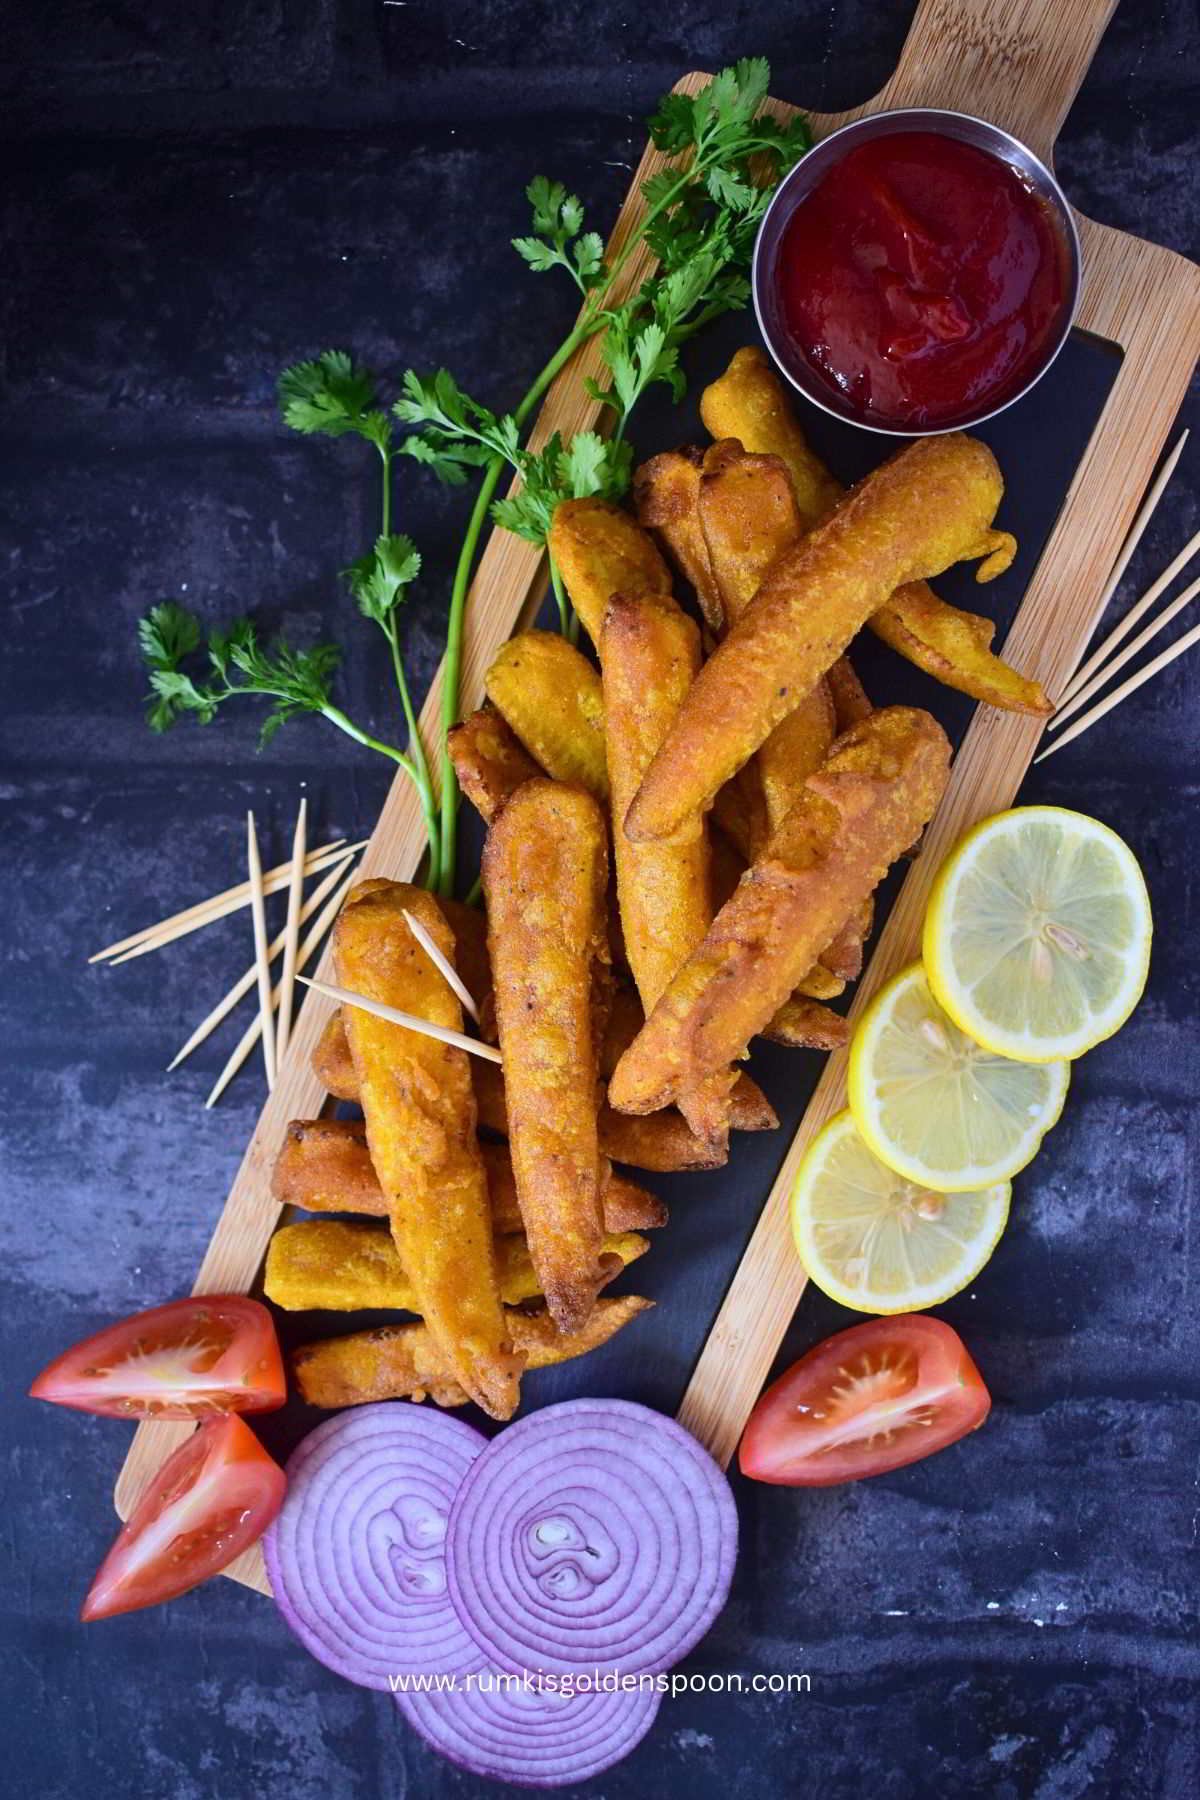 crispy baby corn fritters, how to make baby corn fingers, baby corn finger fry, babycorn fingers, crispy babycorn fingers, babycorn fritters, Rumki's Golden Spoon